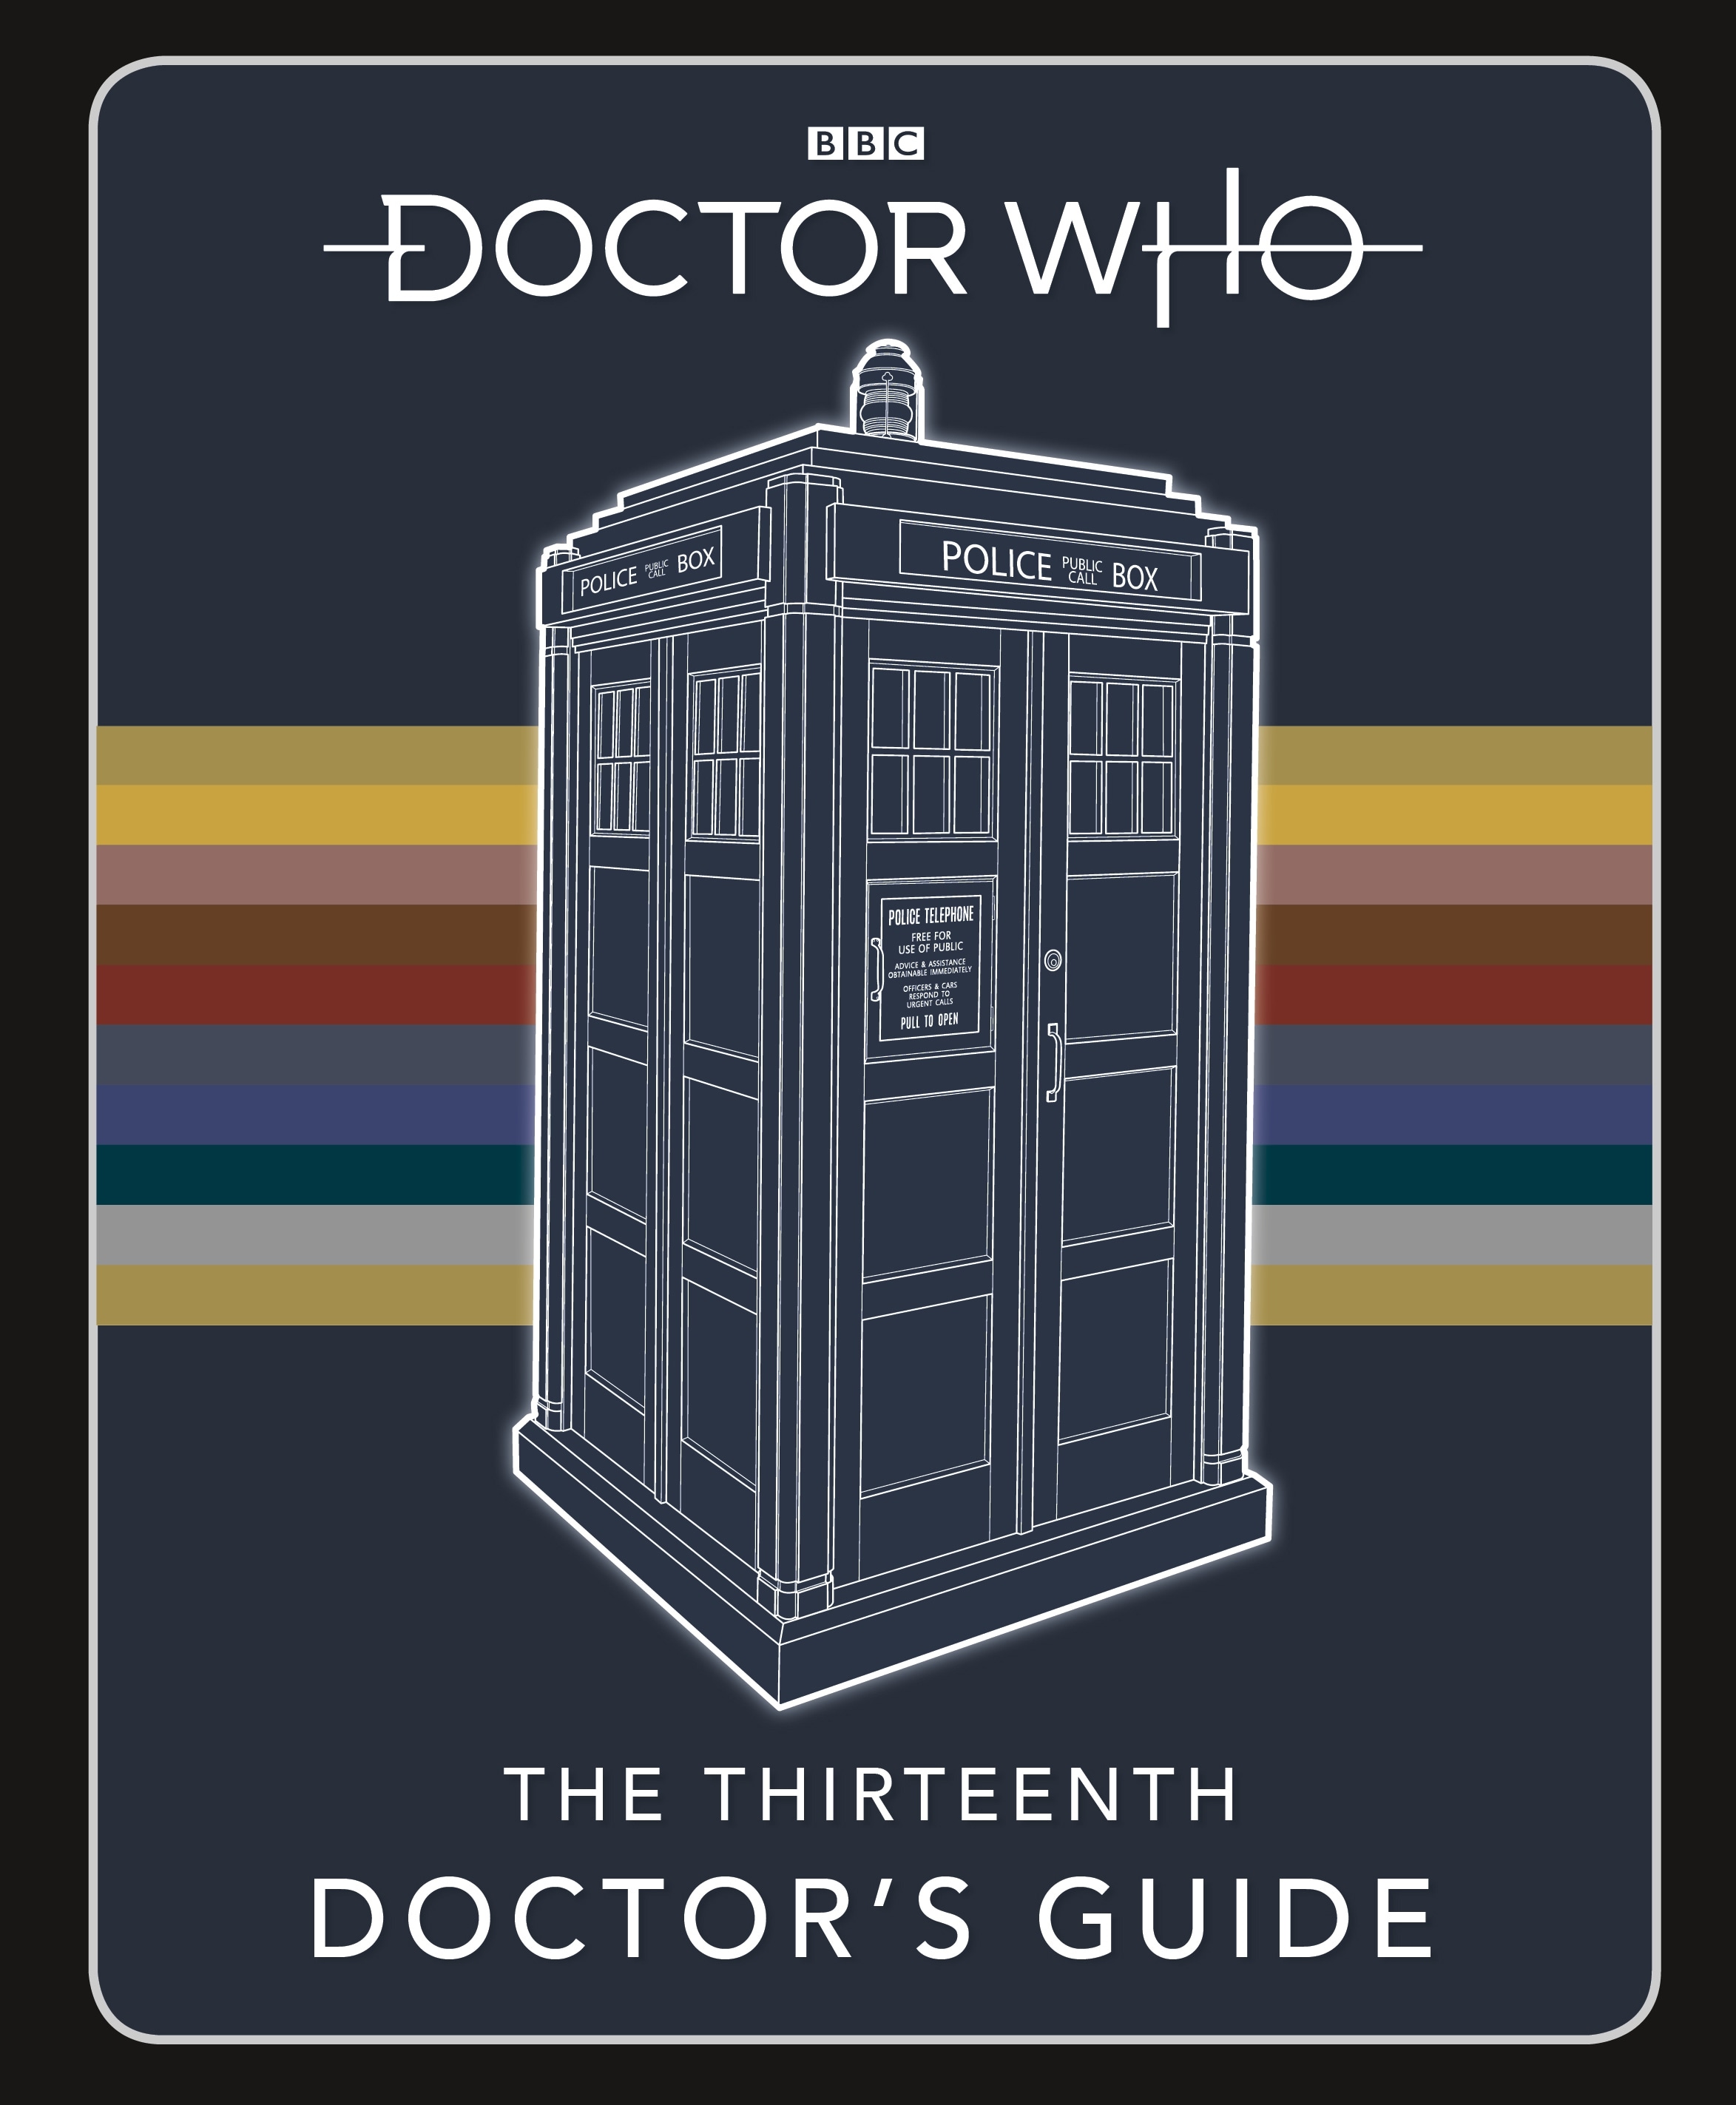 Book “Doctor Who: Thirteenth Doctor's Guide” by Doctor Who — May 28, 2020